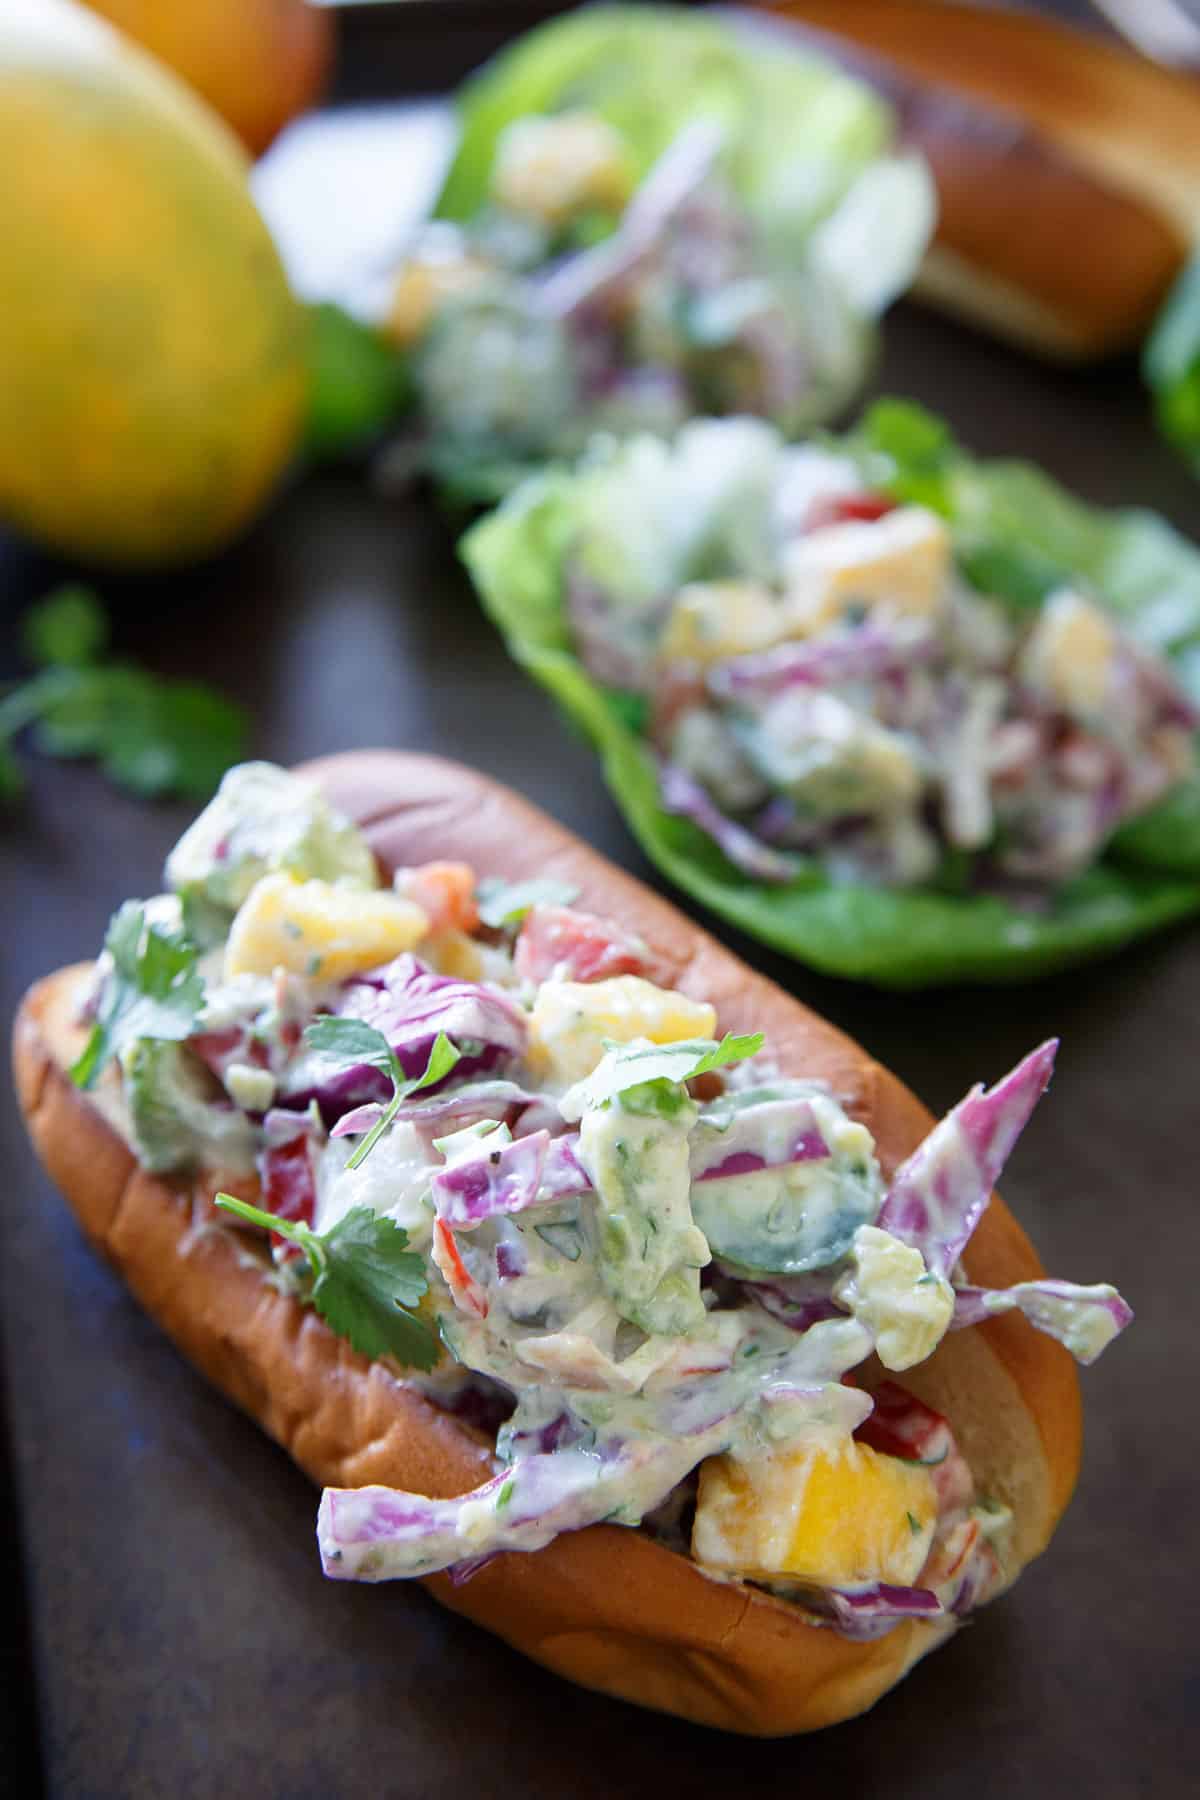 This lobster mango avocado salad is a healthier, tropical twist on the classic summer lobster salad. Serve in lettuce cups or a buttered toasted bun!